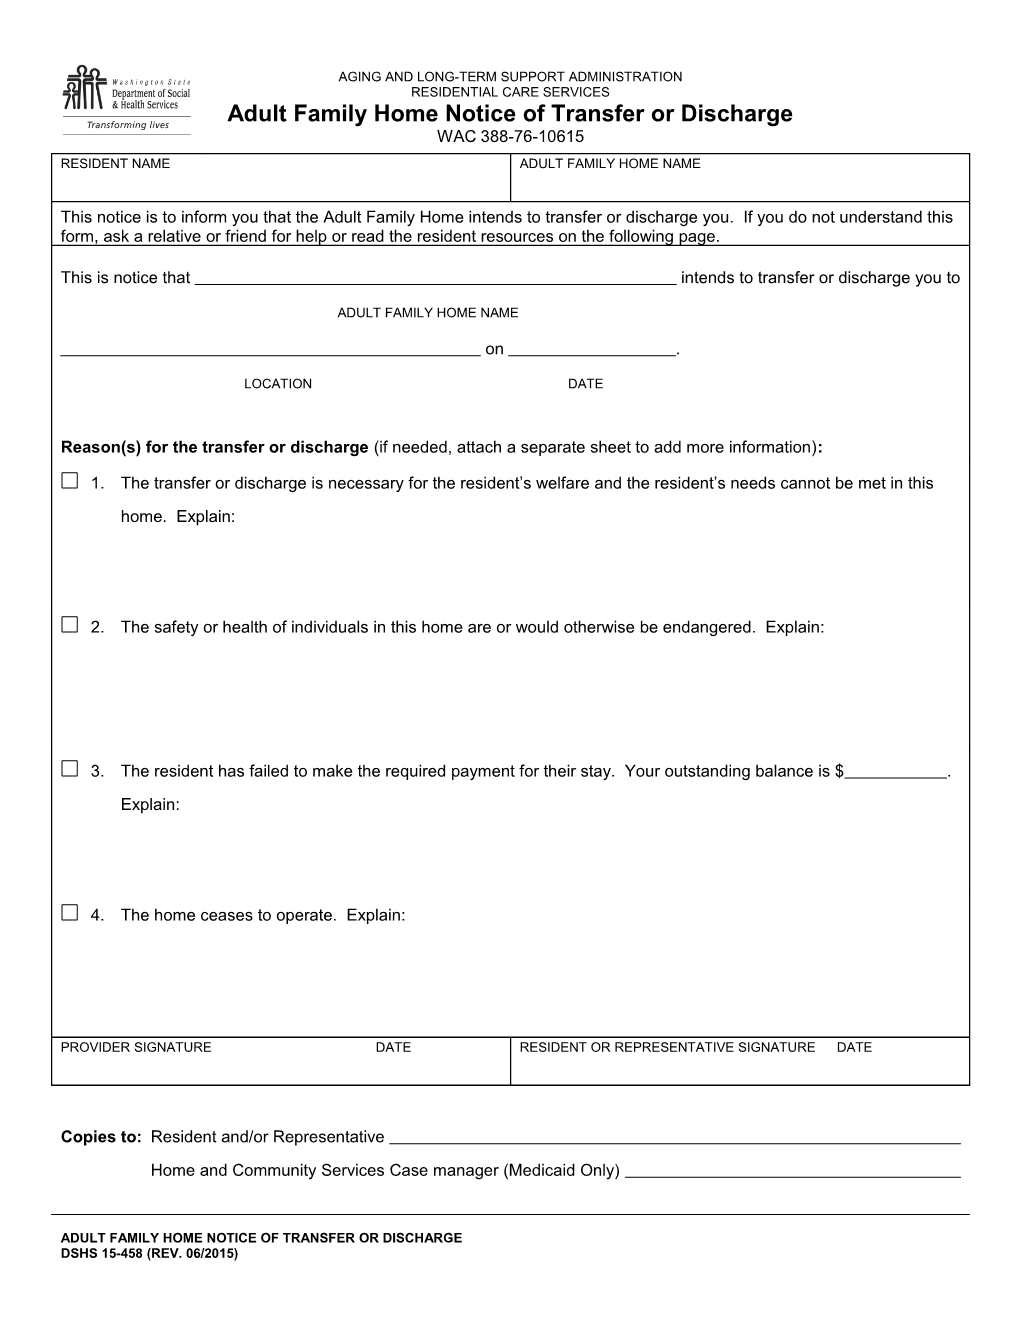 Adult Family Home Notice of Transfer Or Discharge